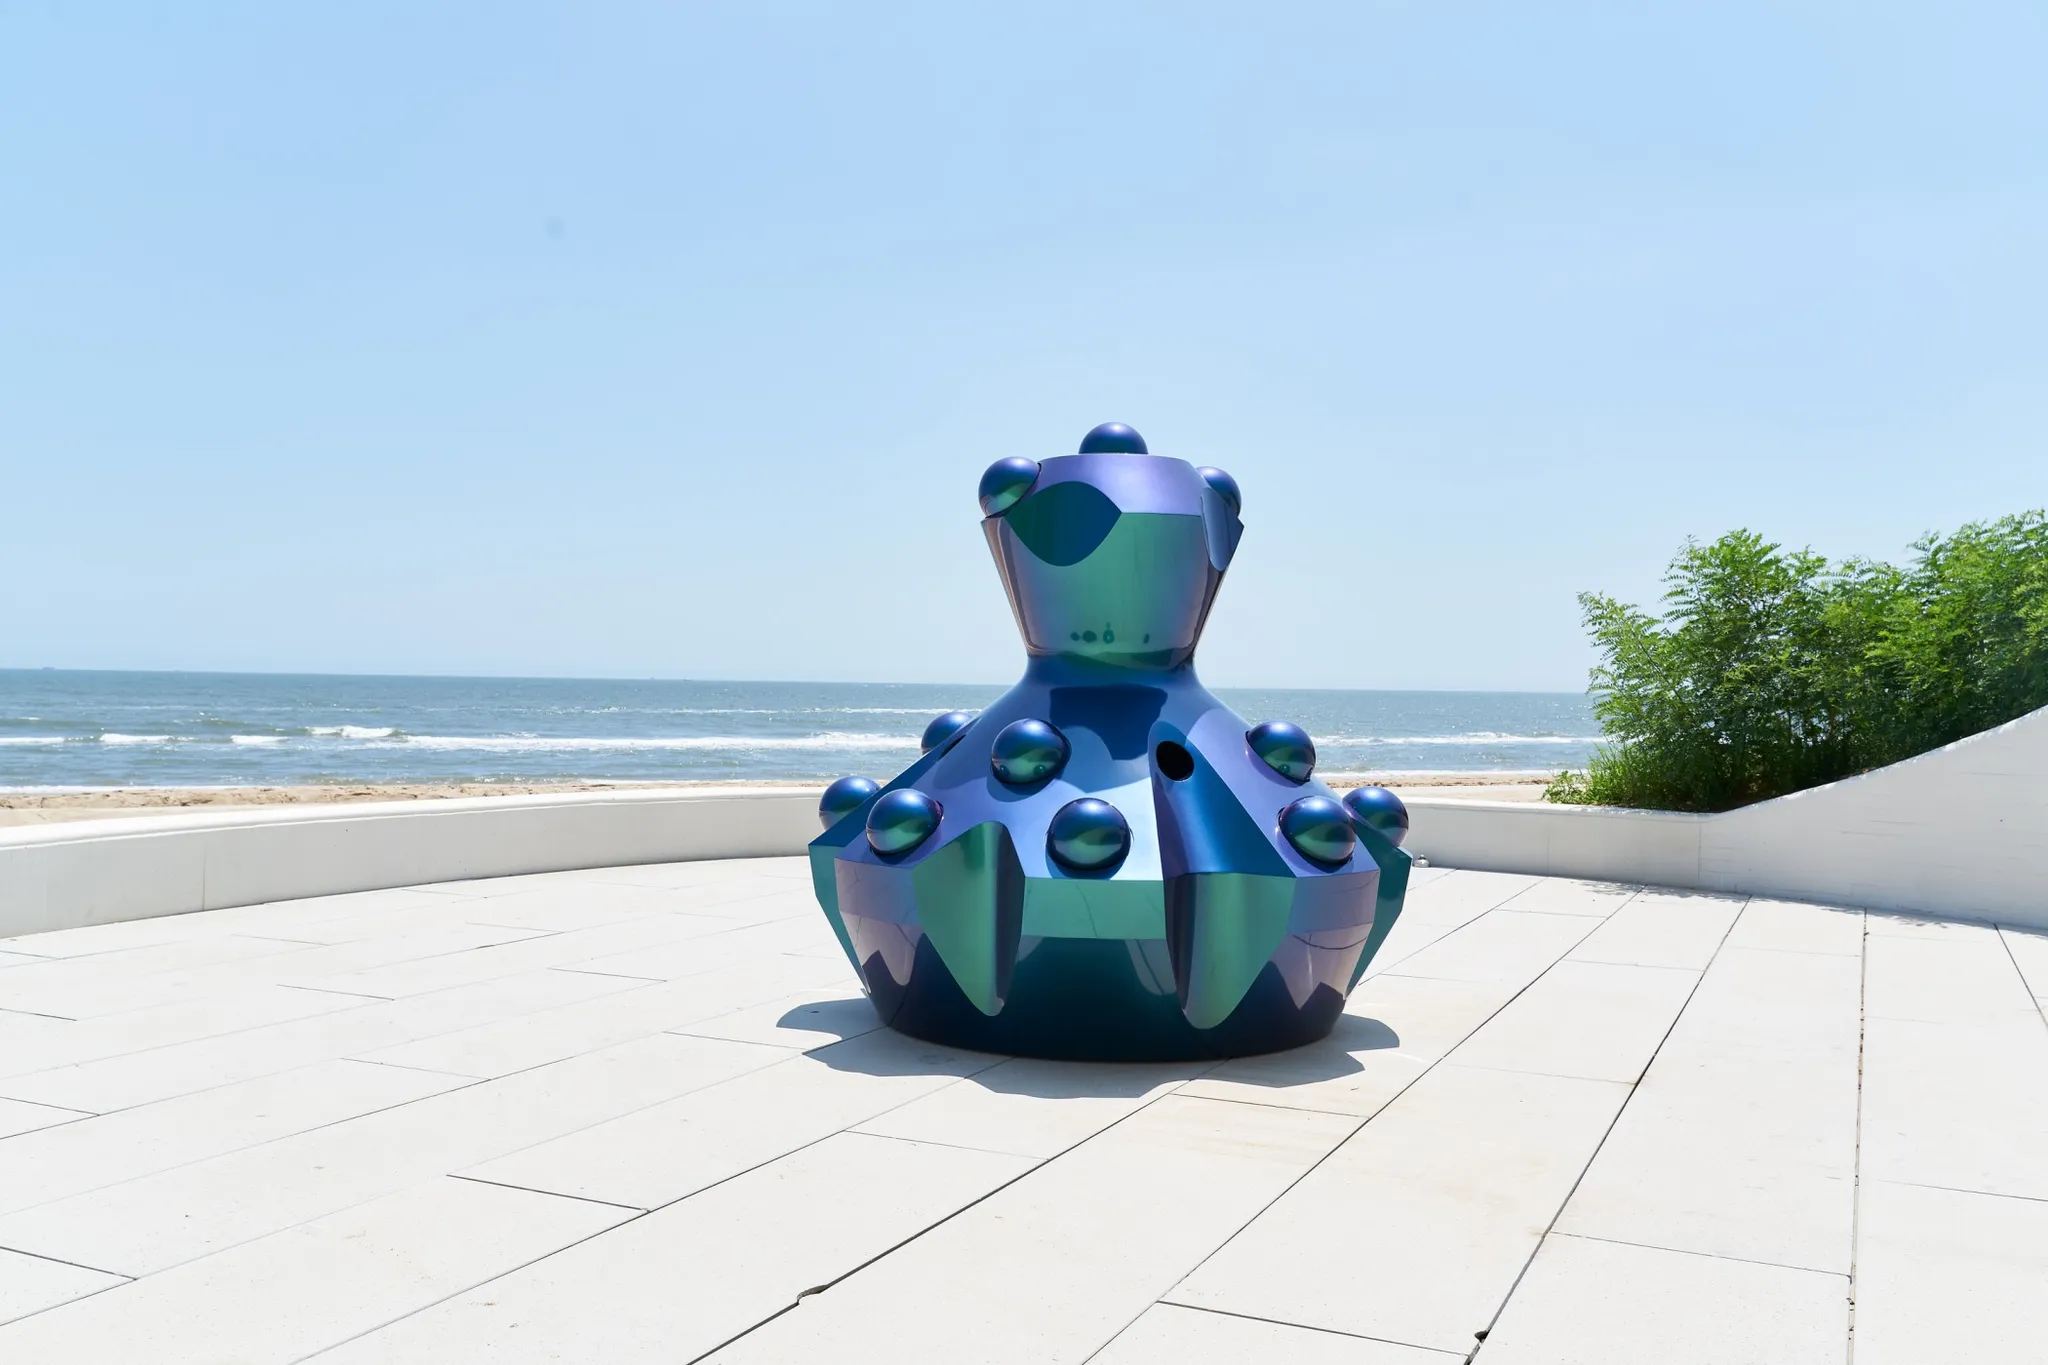 A iridescent-coloured sculpture on a paved terrace facing the beach